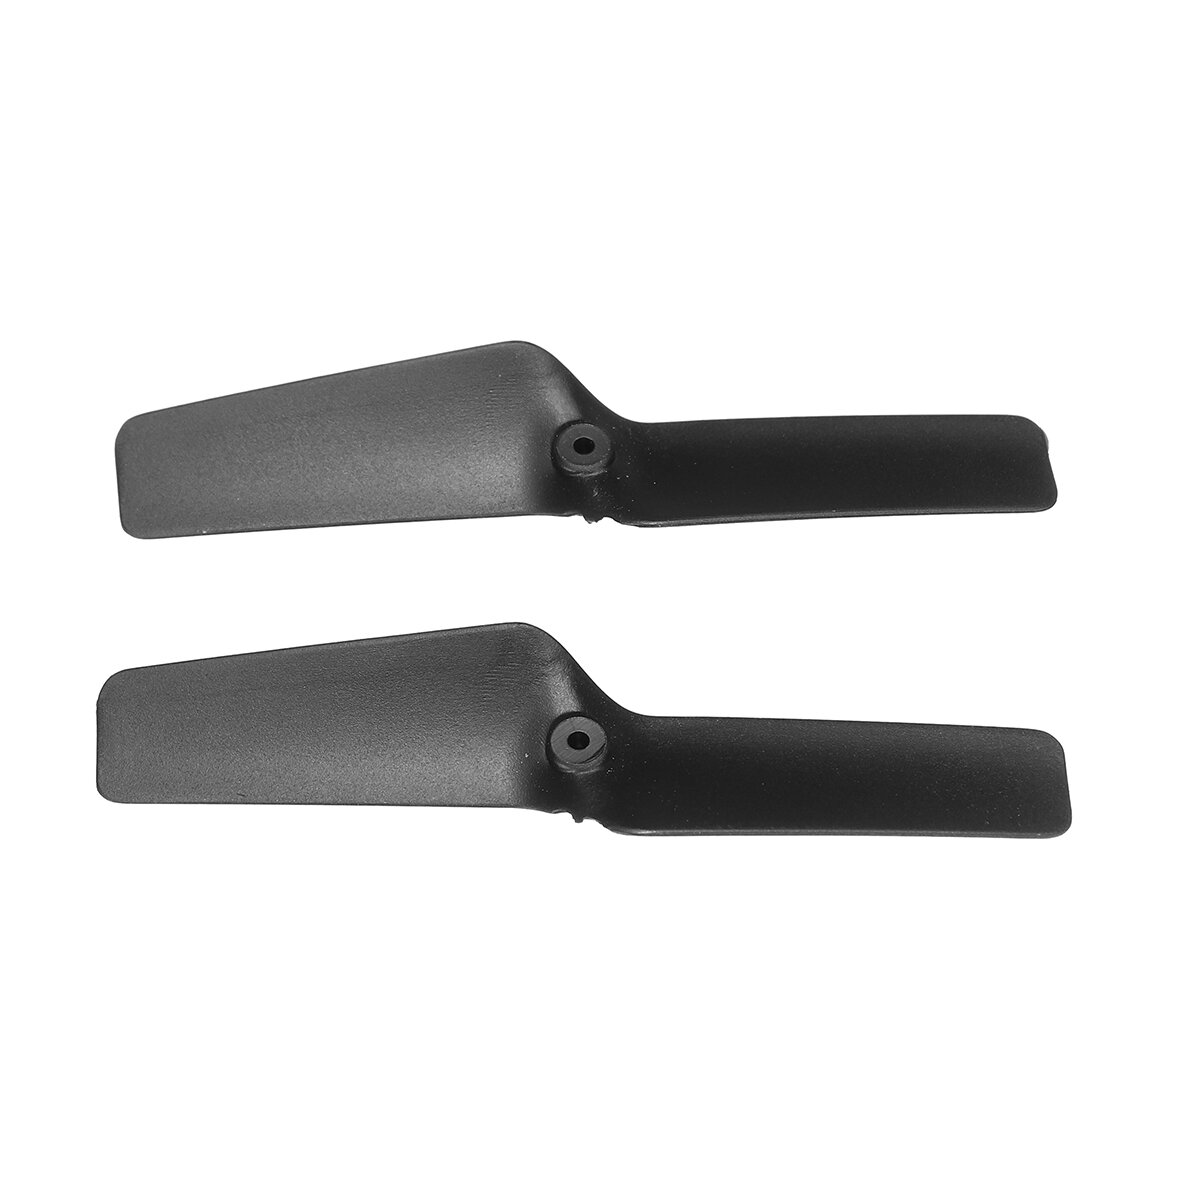 Eachine E120 Tail Blade RC Helicopter Parts